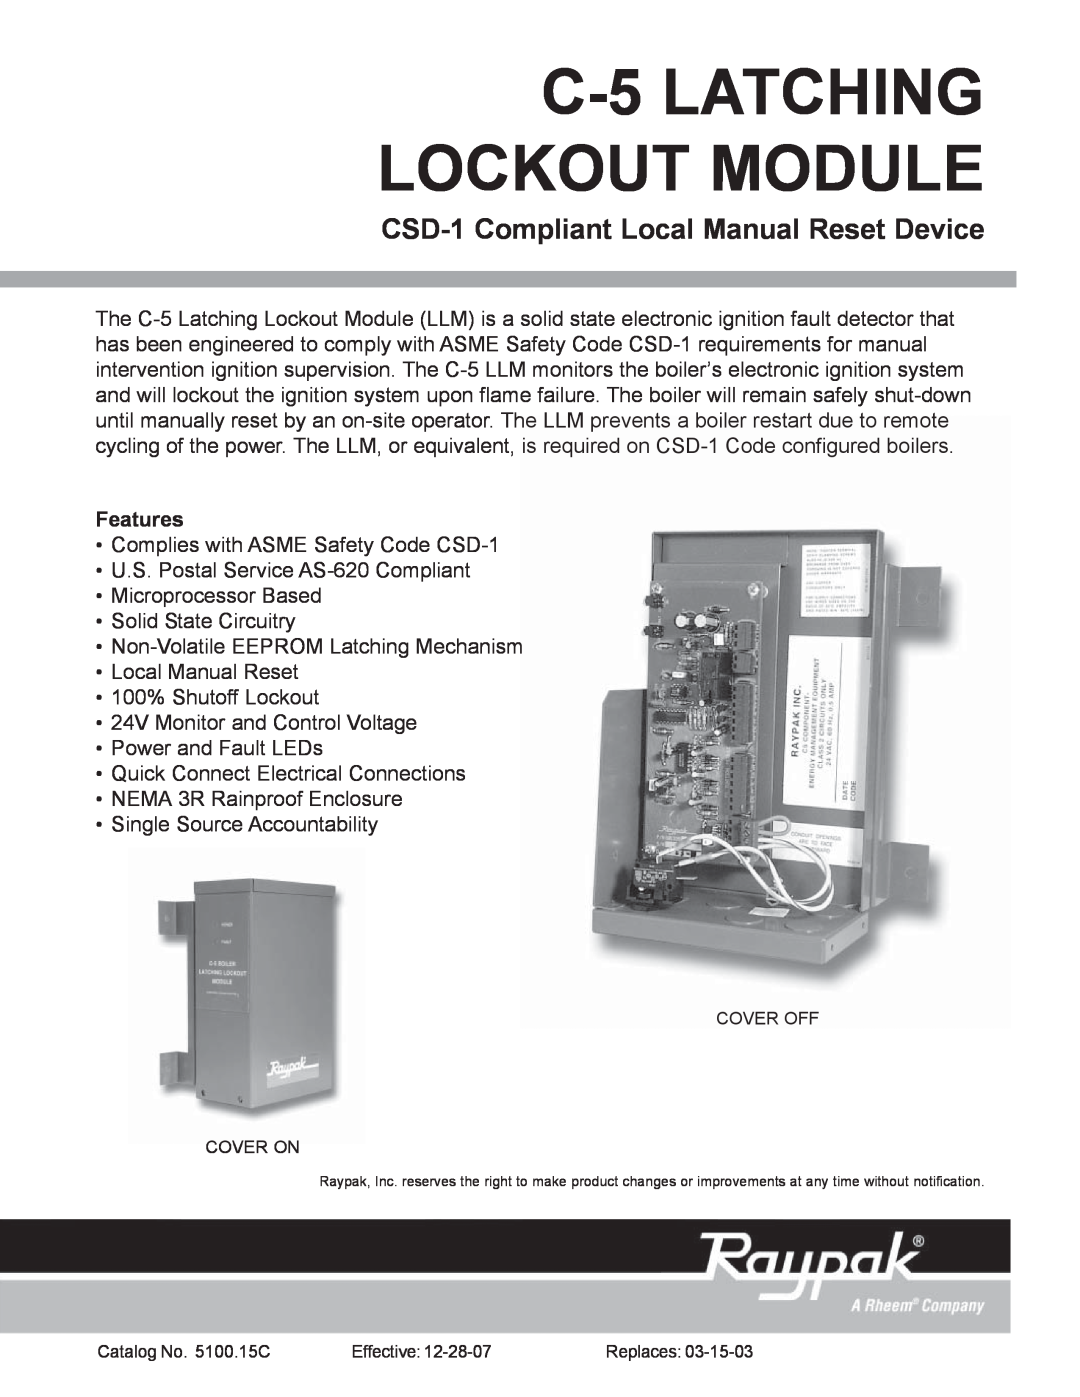 Raypak manual Features, C-5 LATCHING LOCKOUT MODULE, CSD-1 Compliant Local Manual Reset Device 